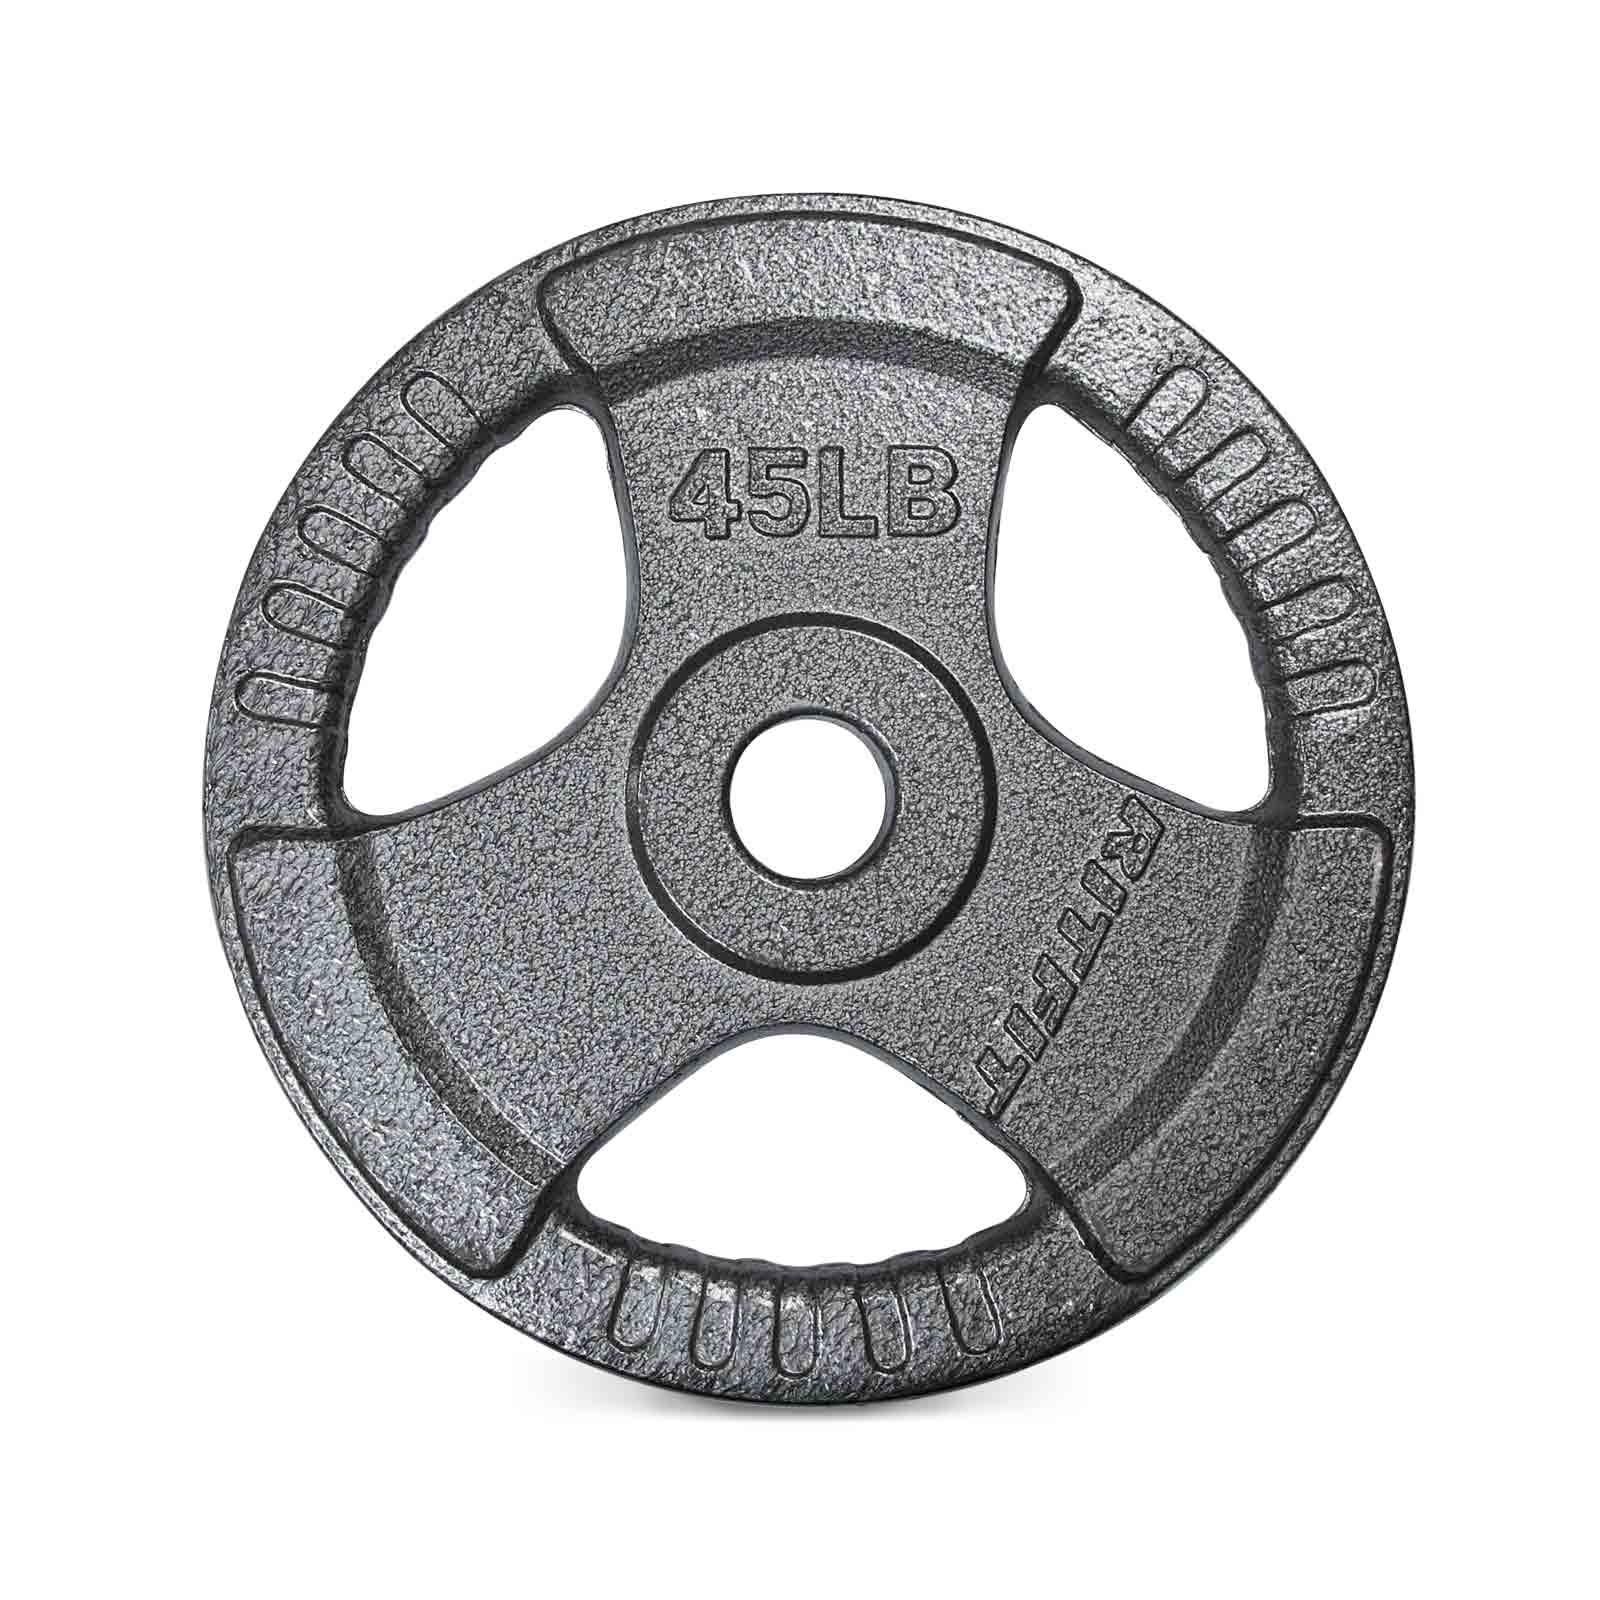 RitFit 45LB Cast Iron Weight Plates Set 2-Inch Olympic Grip Plates for Sale 